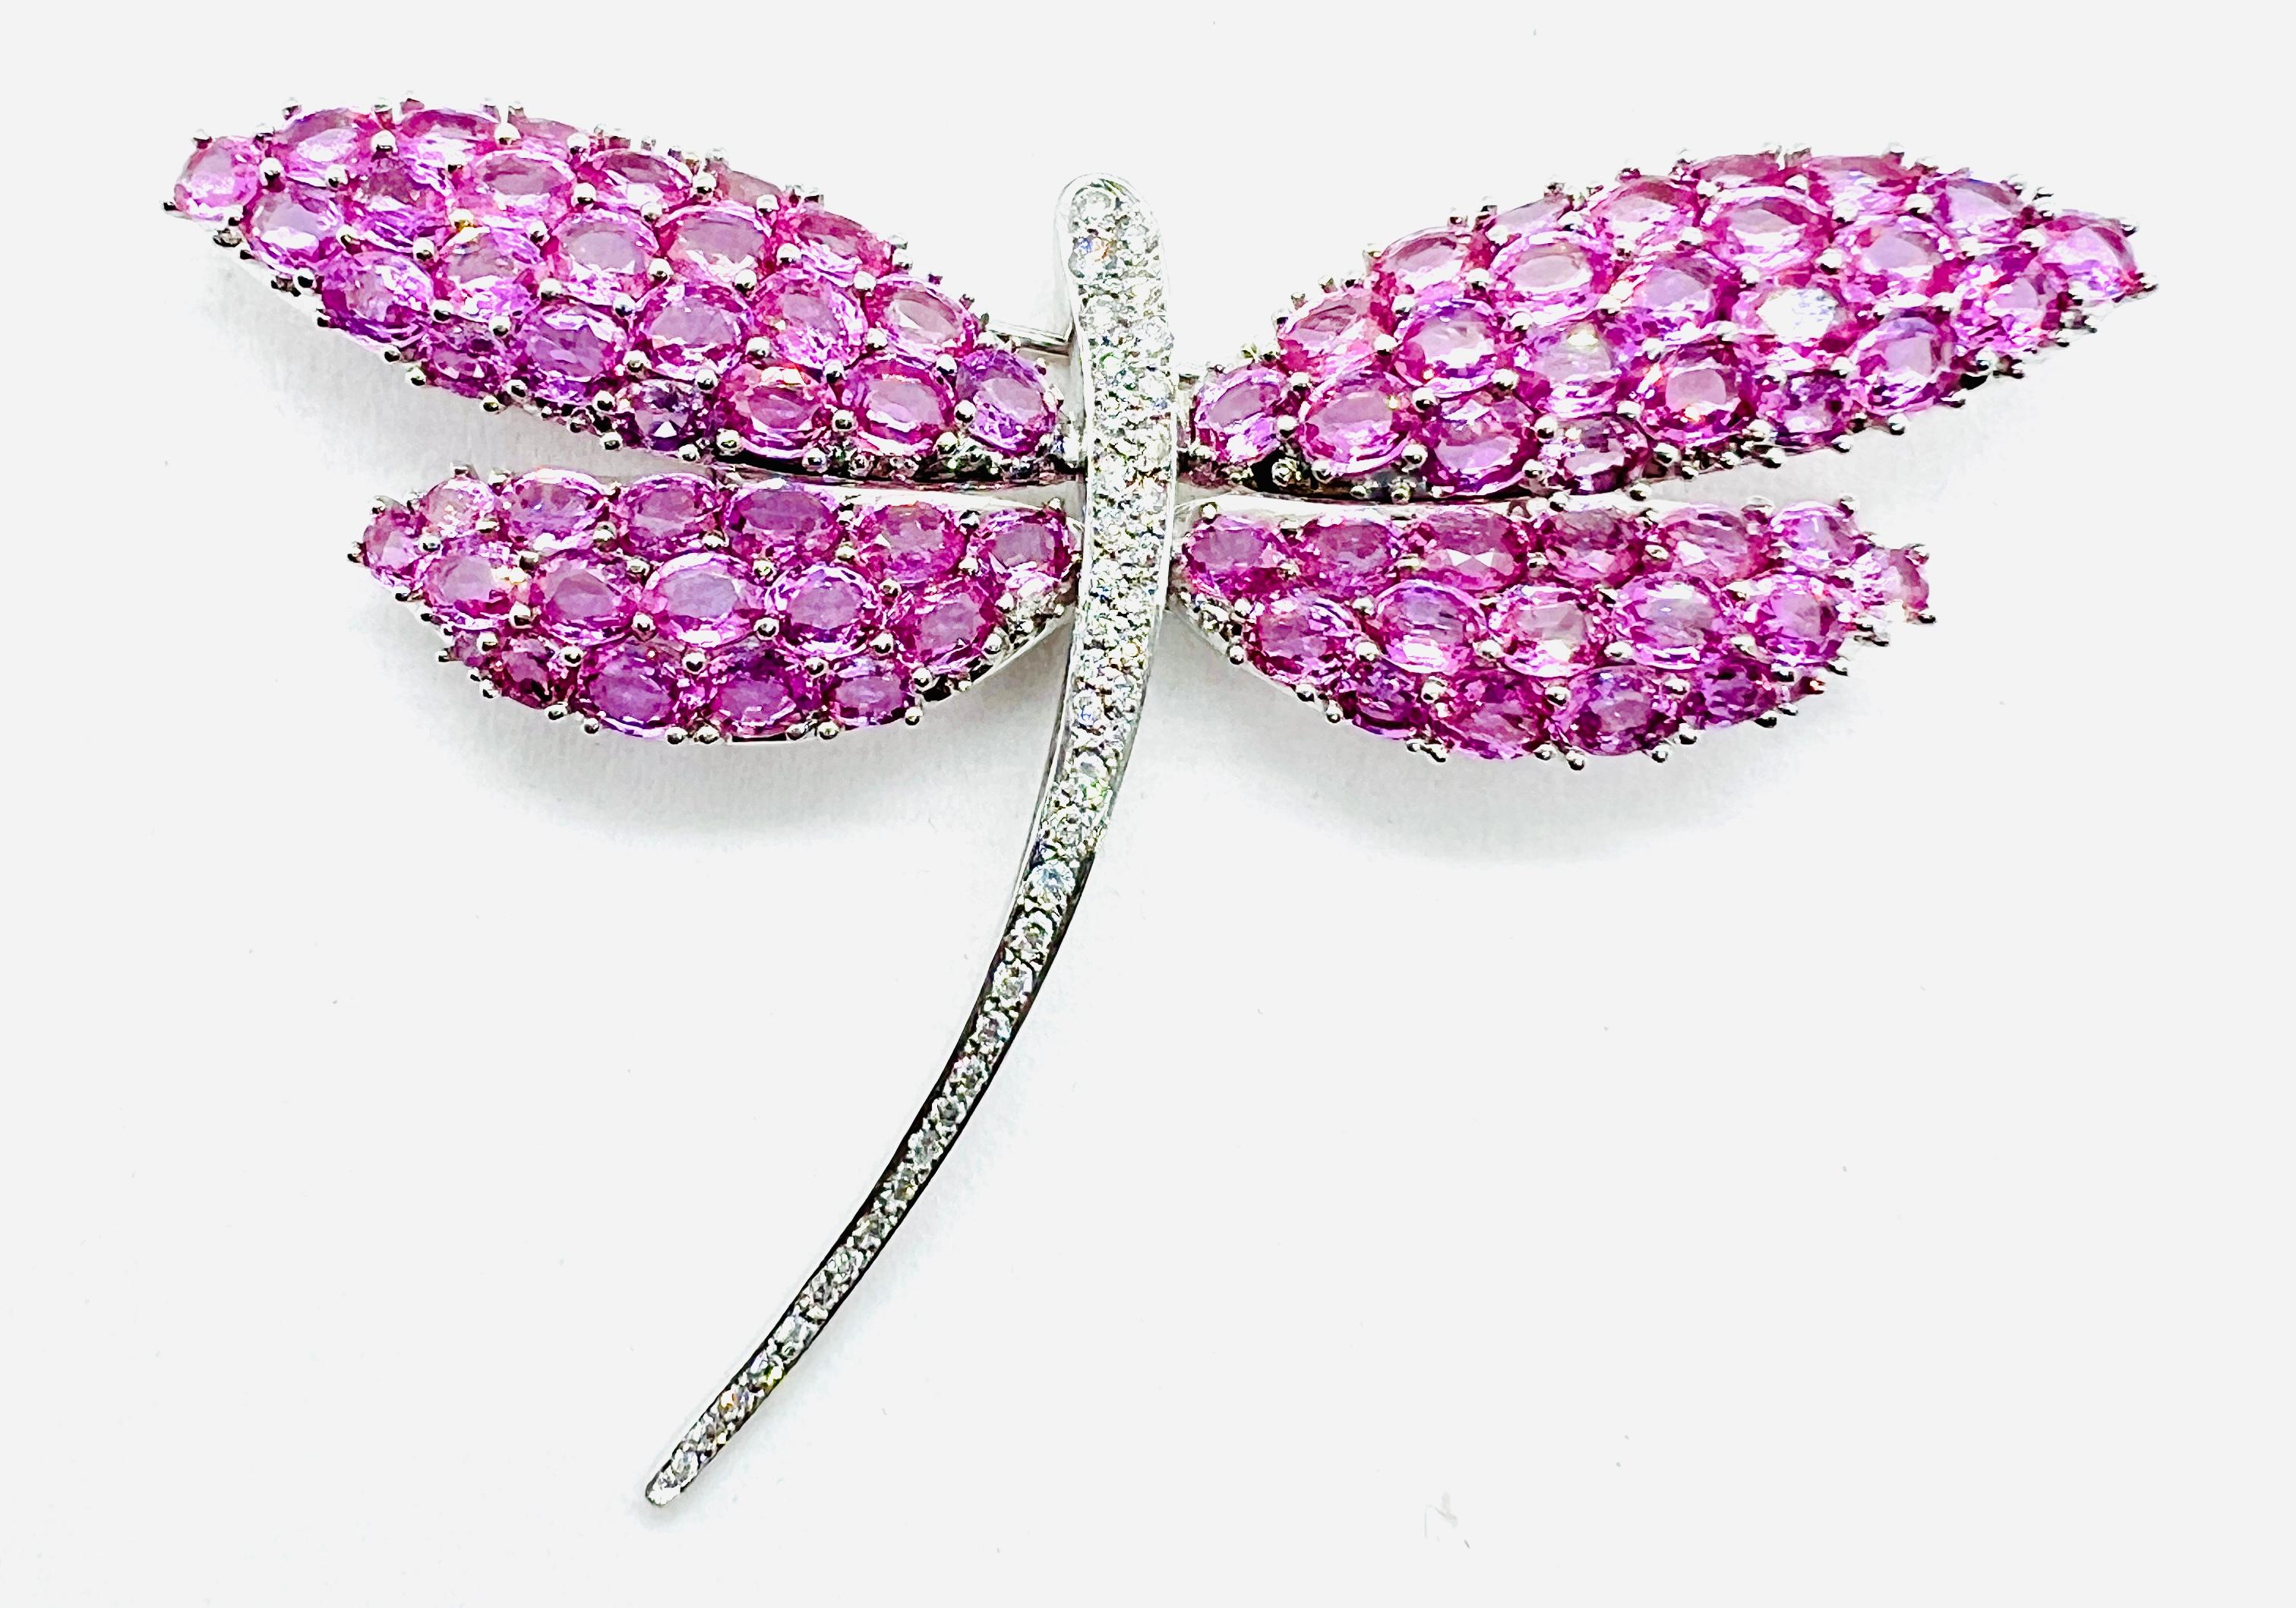 Absolutely Stunning brooch! It is made in 18k White gold, measures 65 by 85 mm (3.5 inches by 2.5 inches) and weighs 31.84 grams. The wings of the dragonfly consist of 78 oval pink sapphires with a carat total weight of 23. The body of the dragonfly